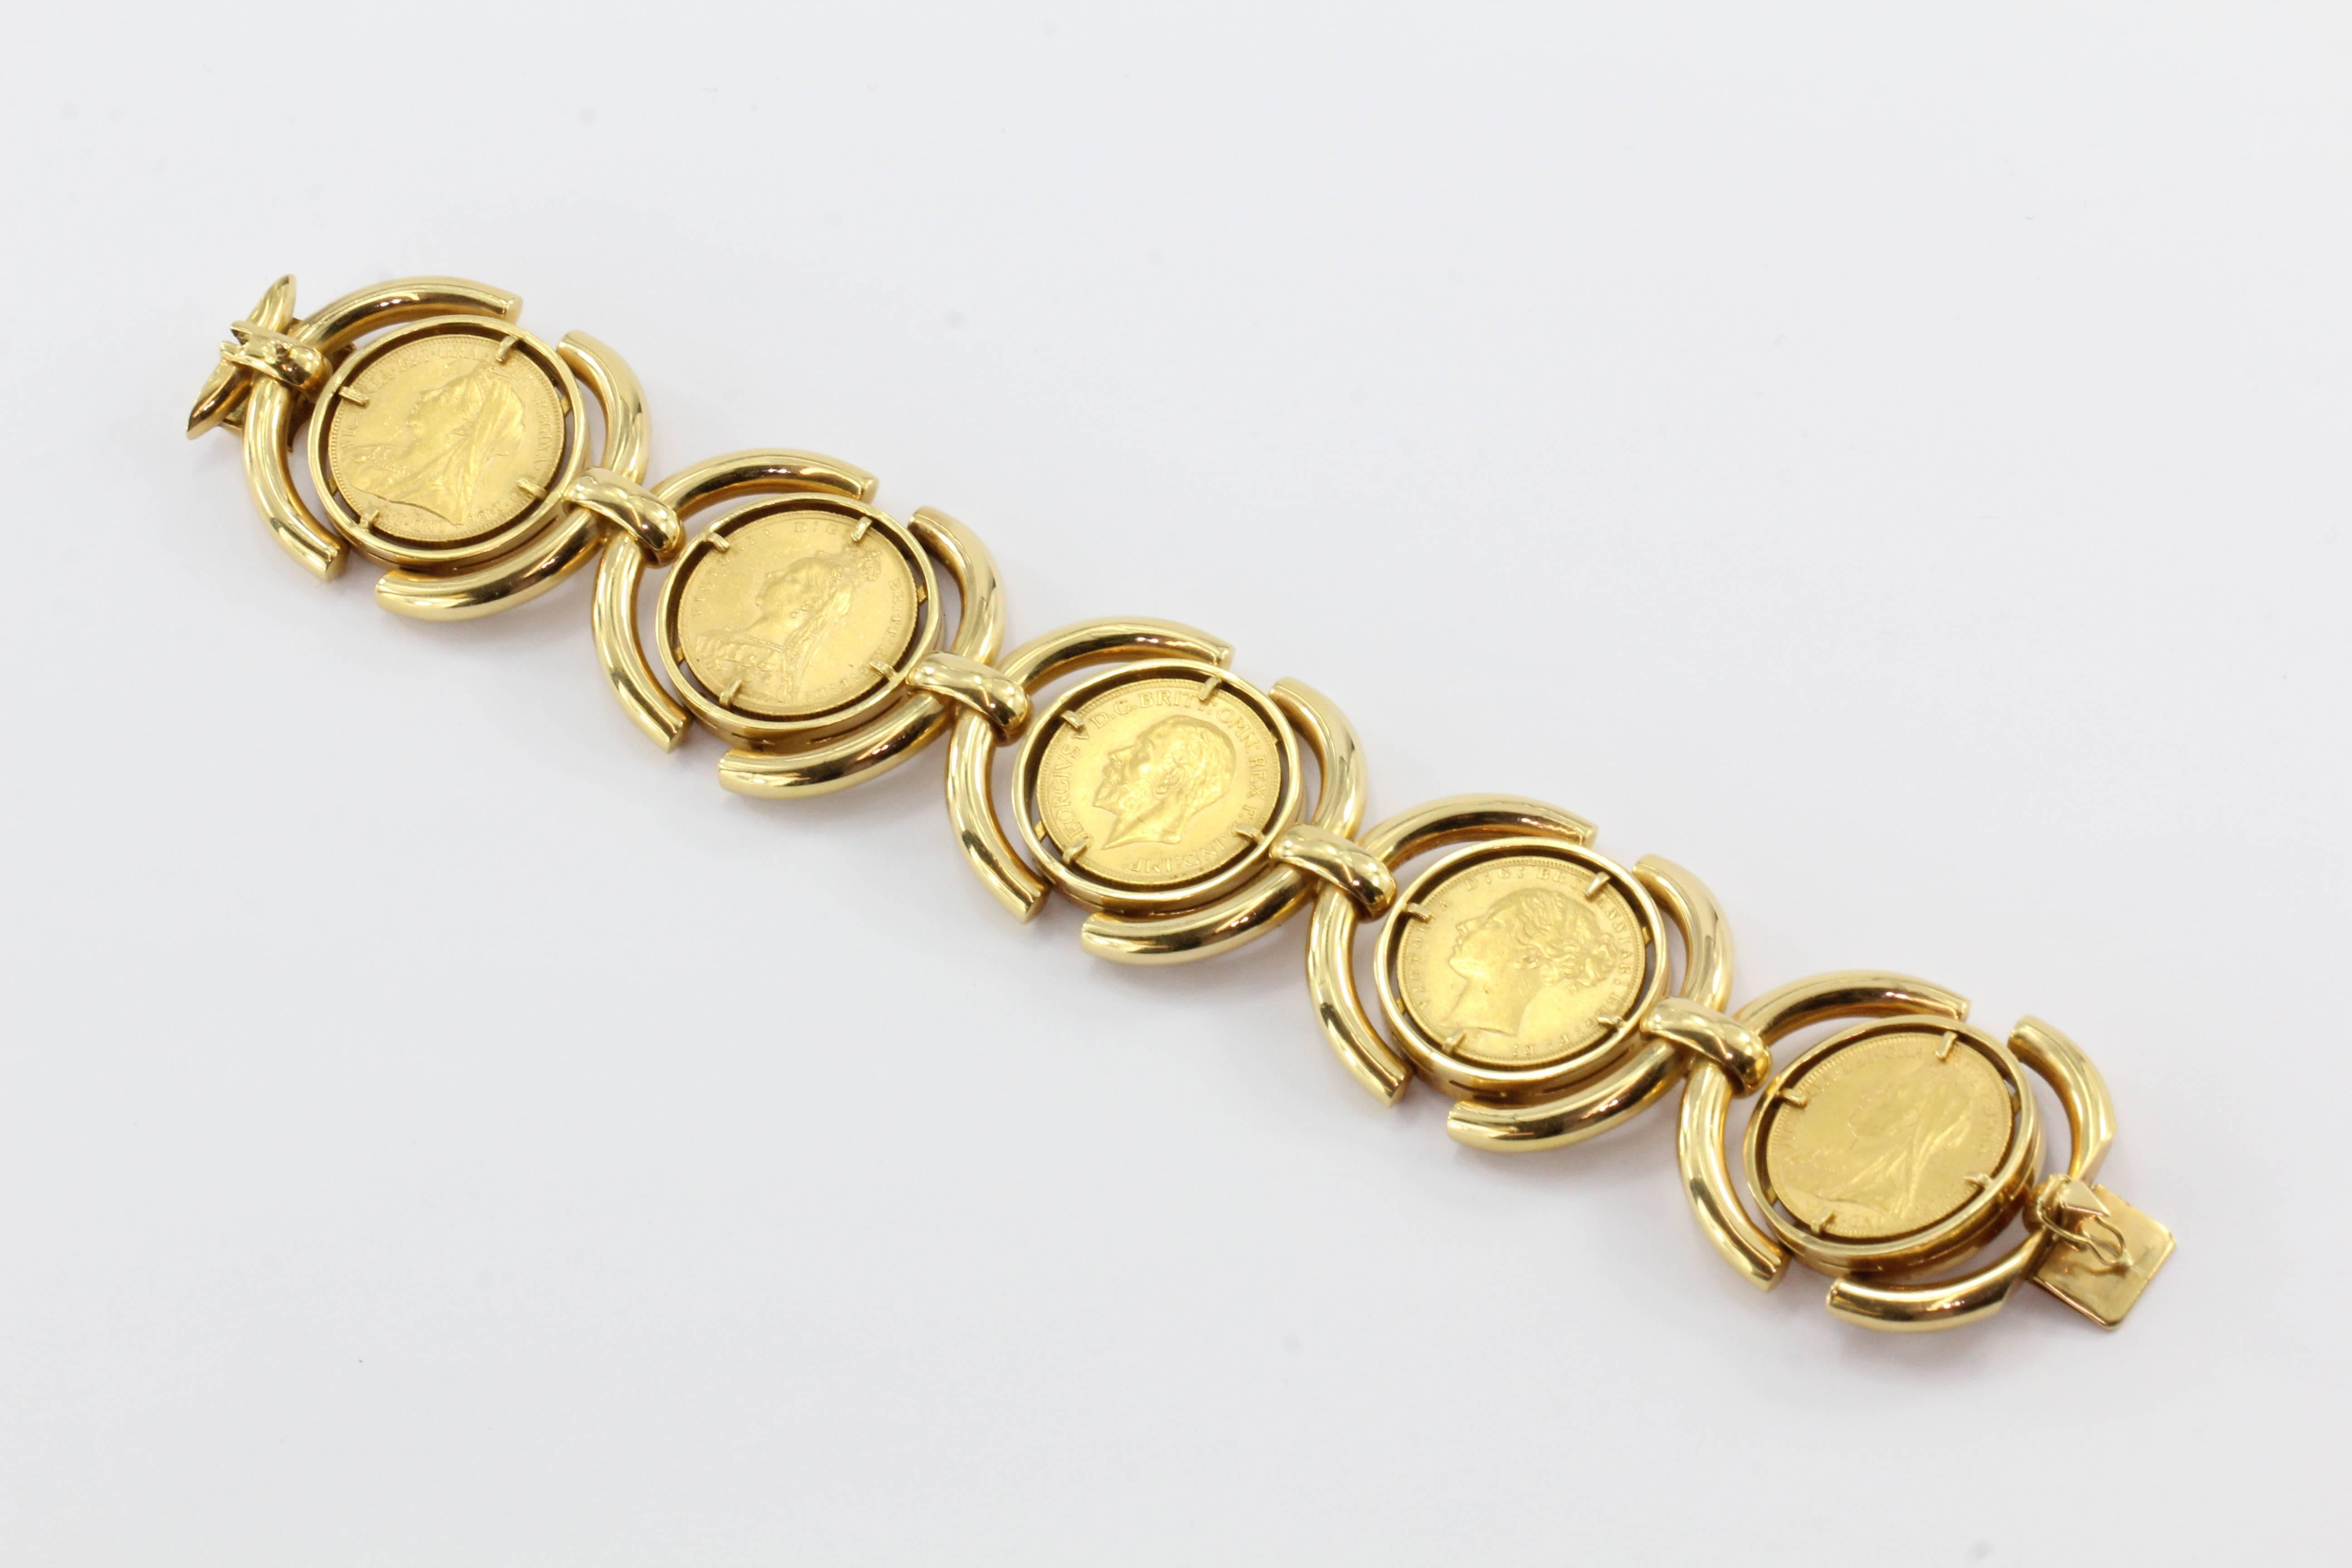 18k Gold Chunky British Gold Sovereign Coin Bracelet. The piece is in excellent estate condition and ready to wear. It is set with five 22K gold British Sovereigns. The bracelet is hallmarked 